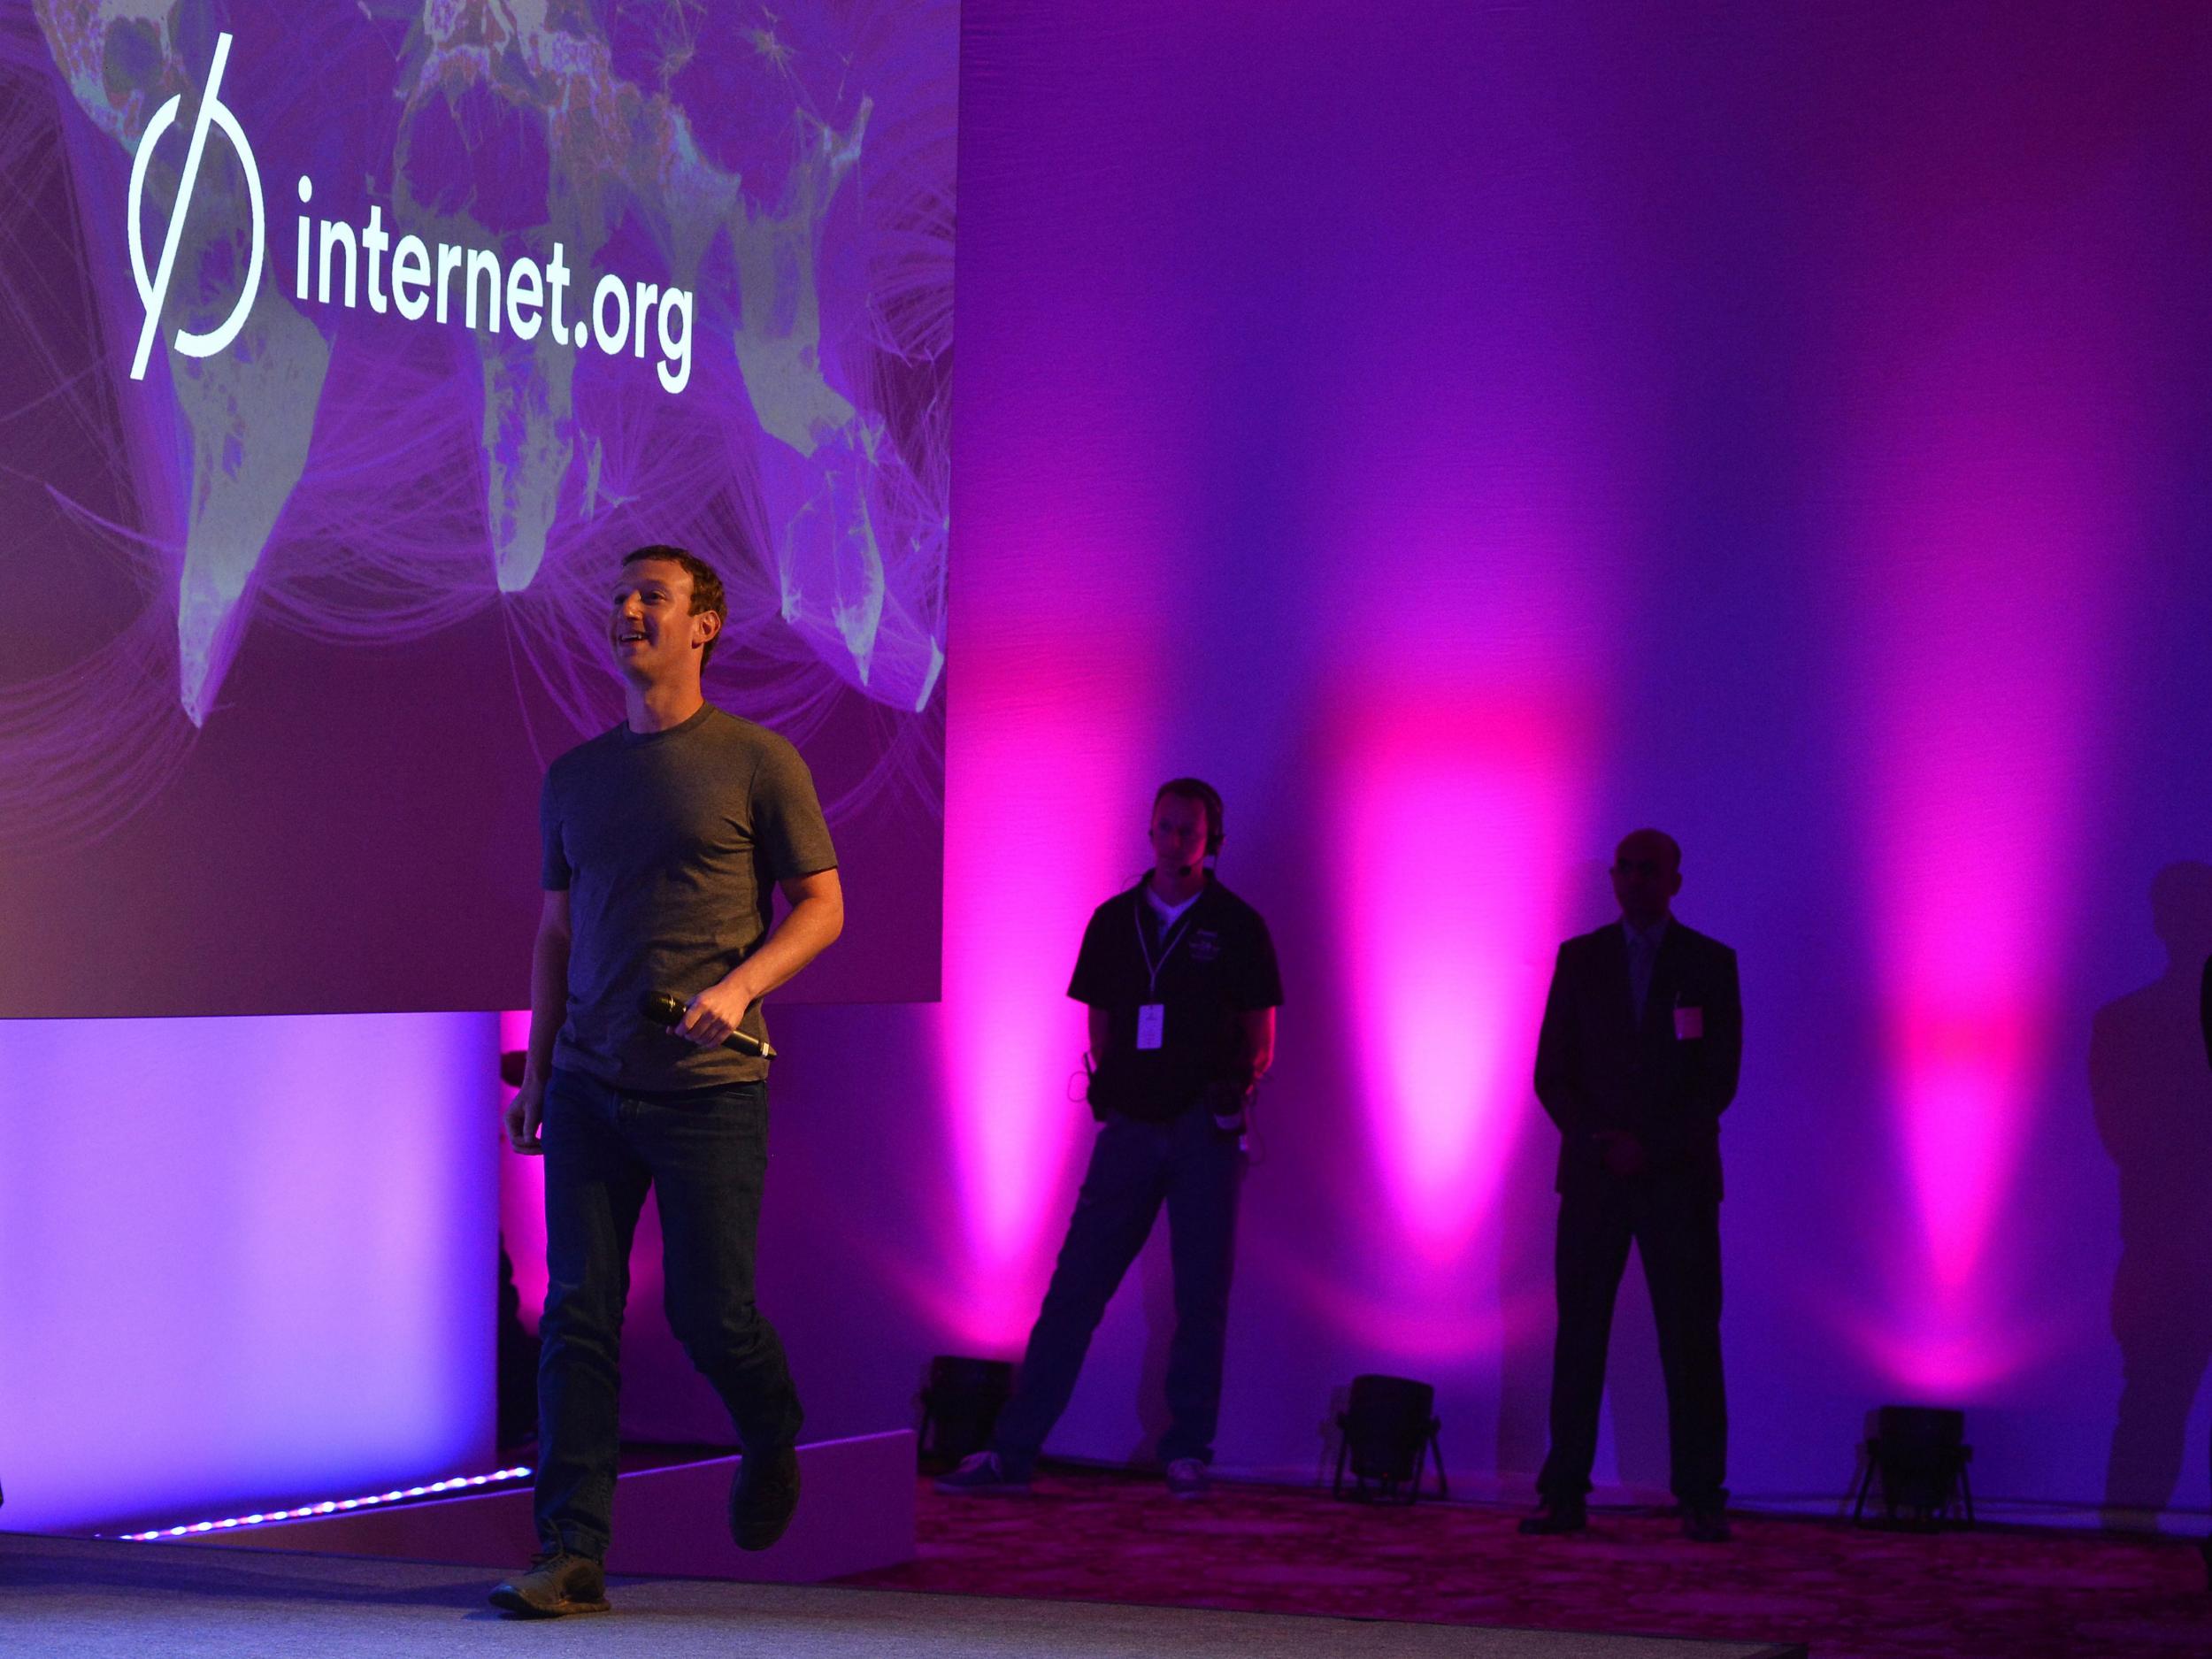 US chairman and chief executive of Facebook Mark Zuckerberg walks on stage to announce the Internet.org Innovation Challenge in India in New Delhi on October 9, 2014